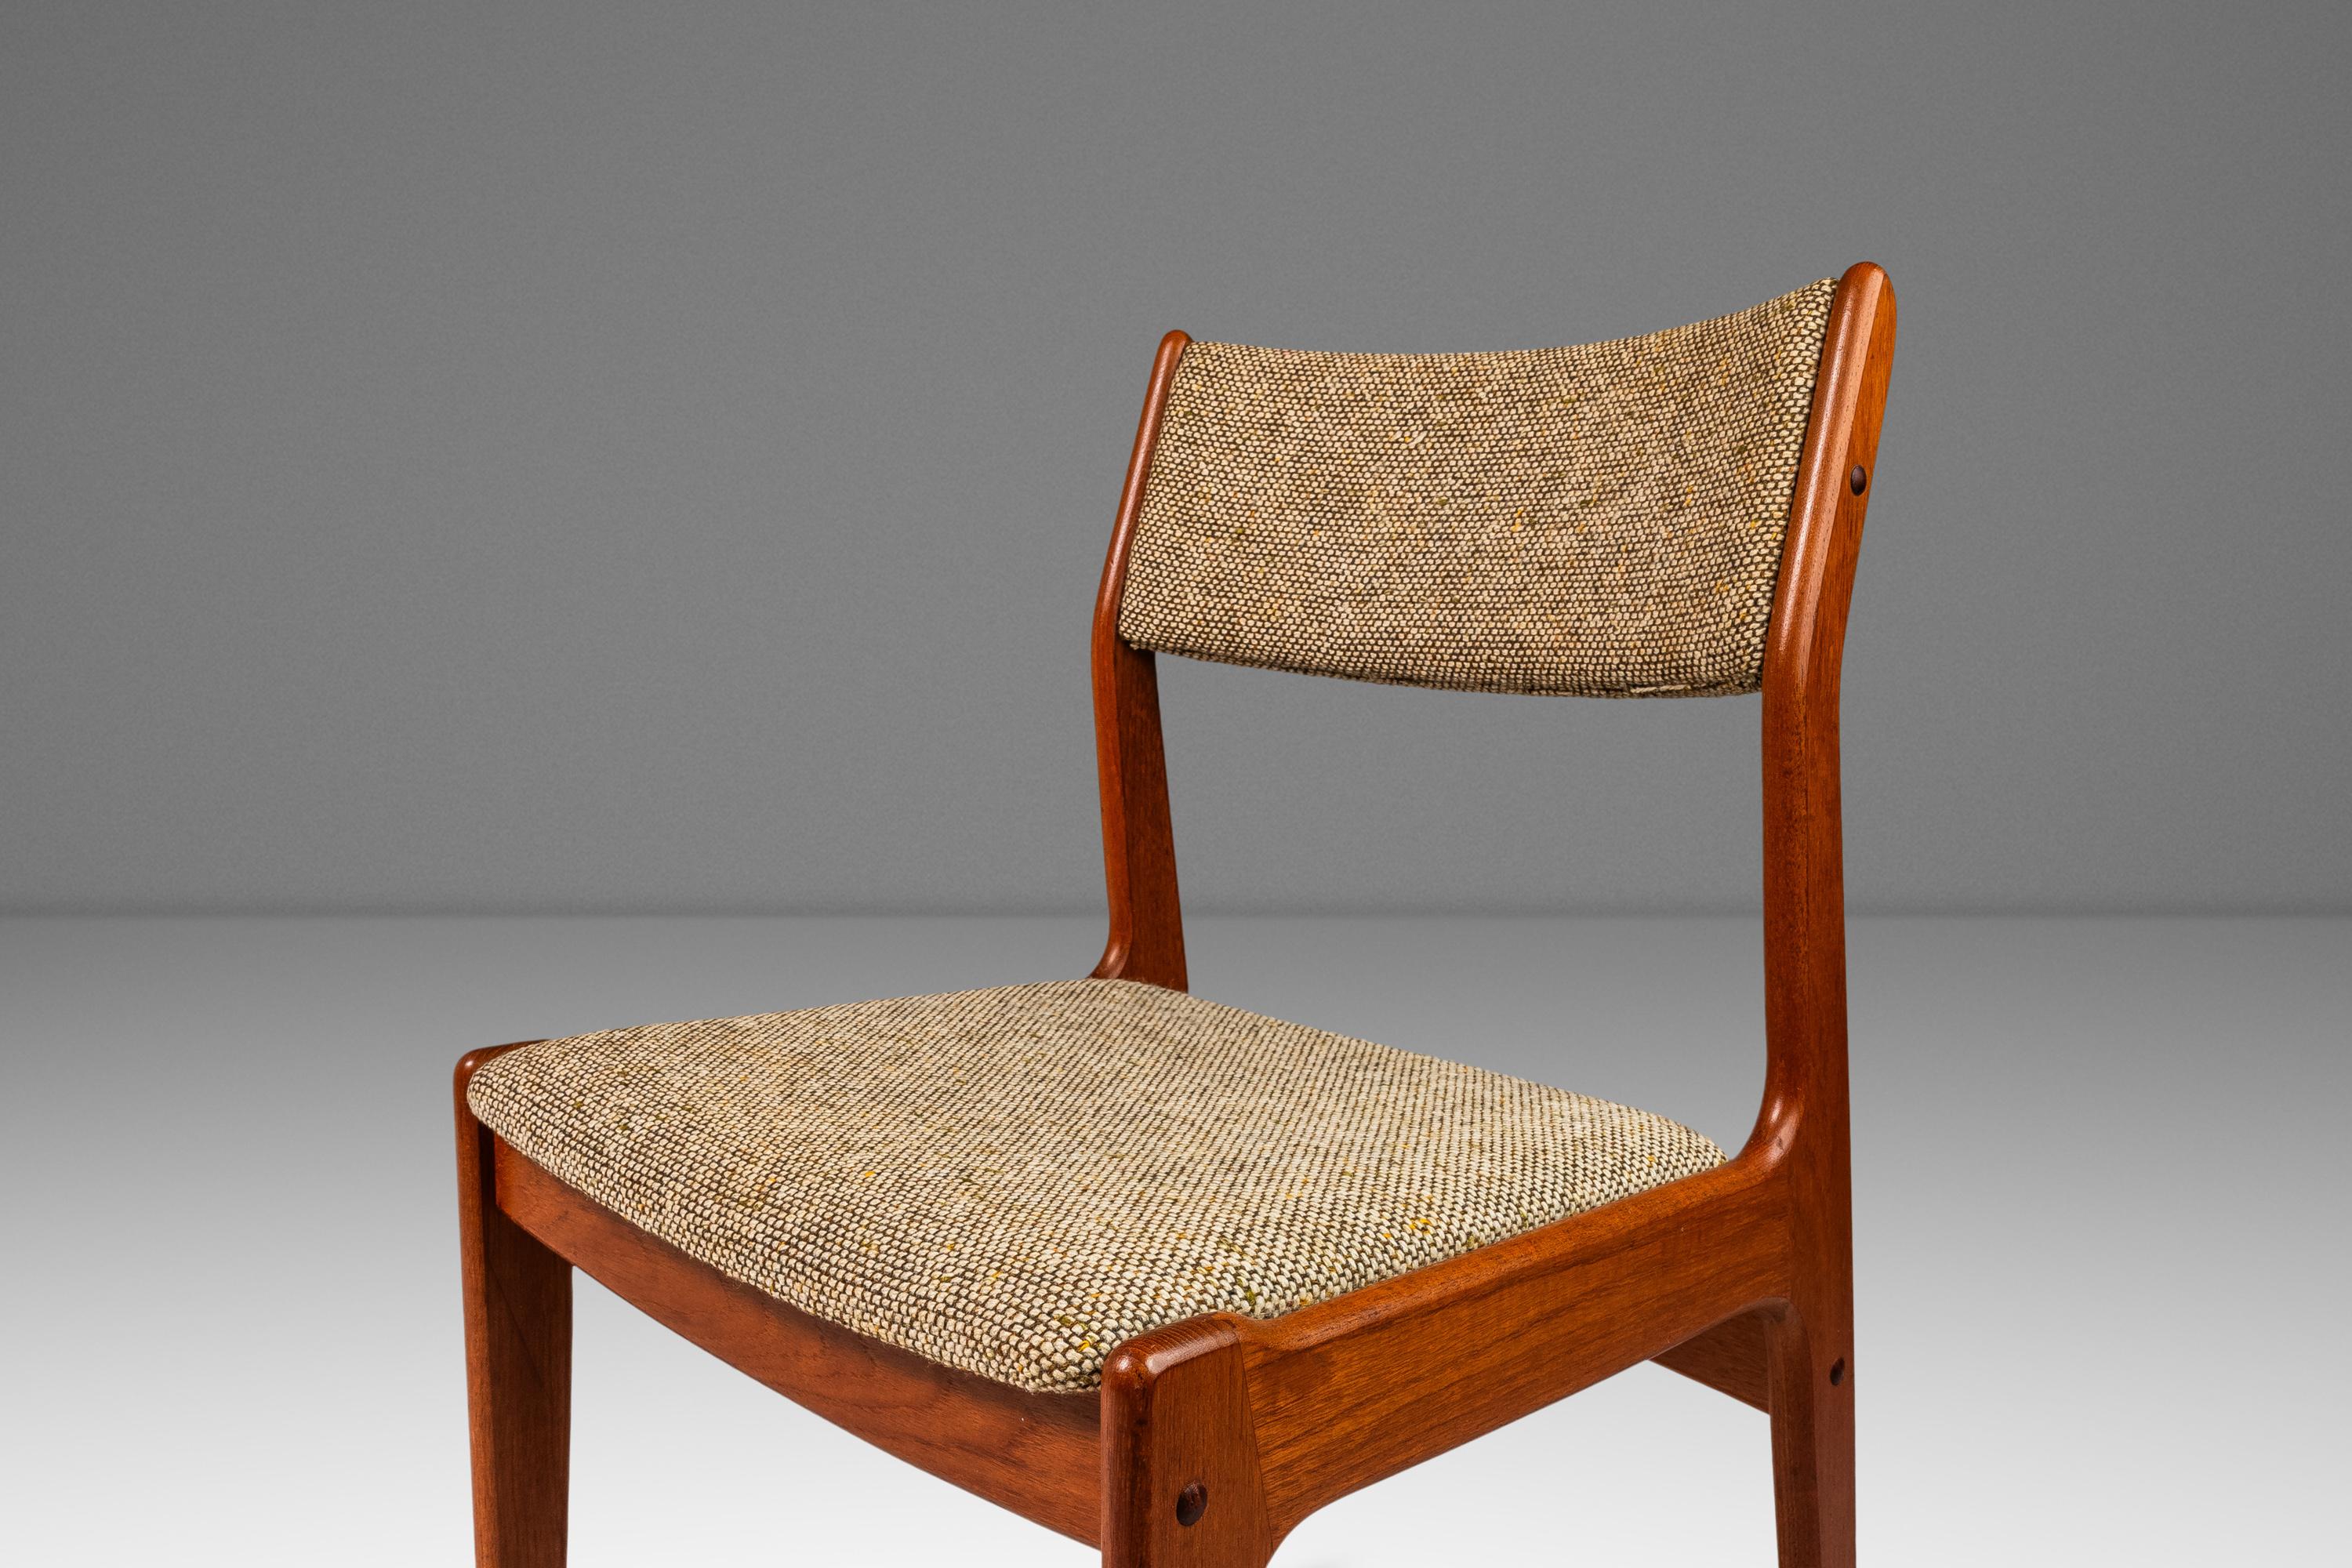 Set of 4 Danish Teak Dining Chairs by D-SCAN, Original Fabric, c. 1970s For Sale 4